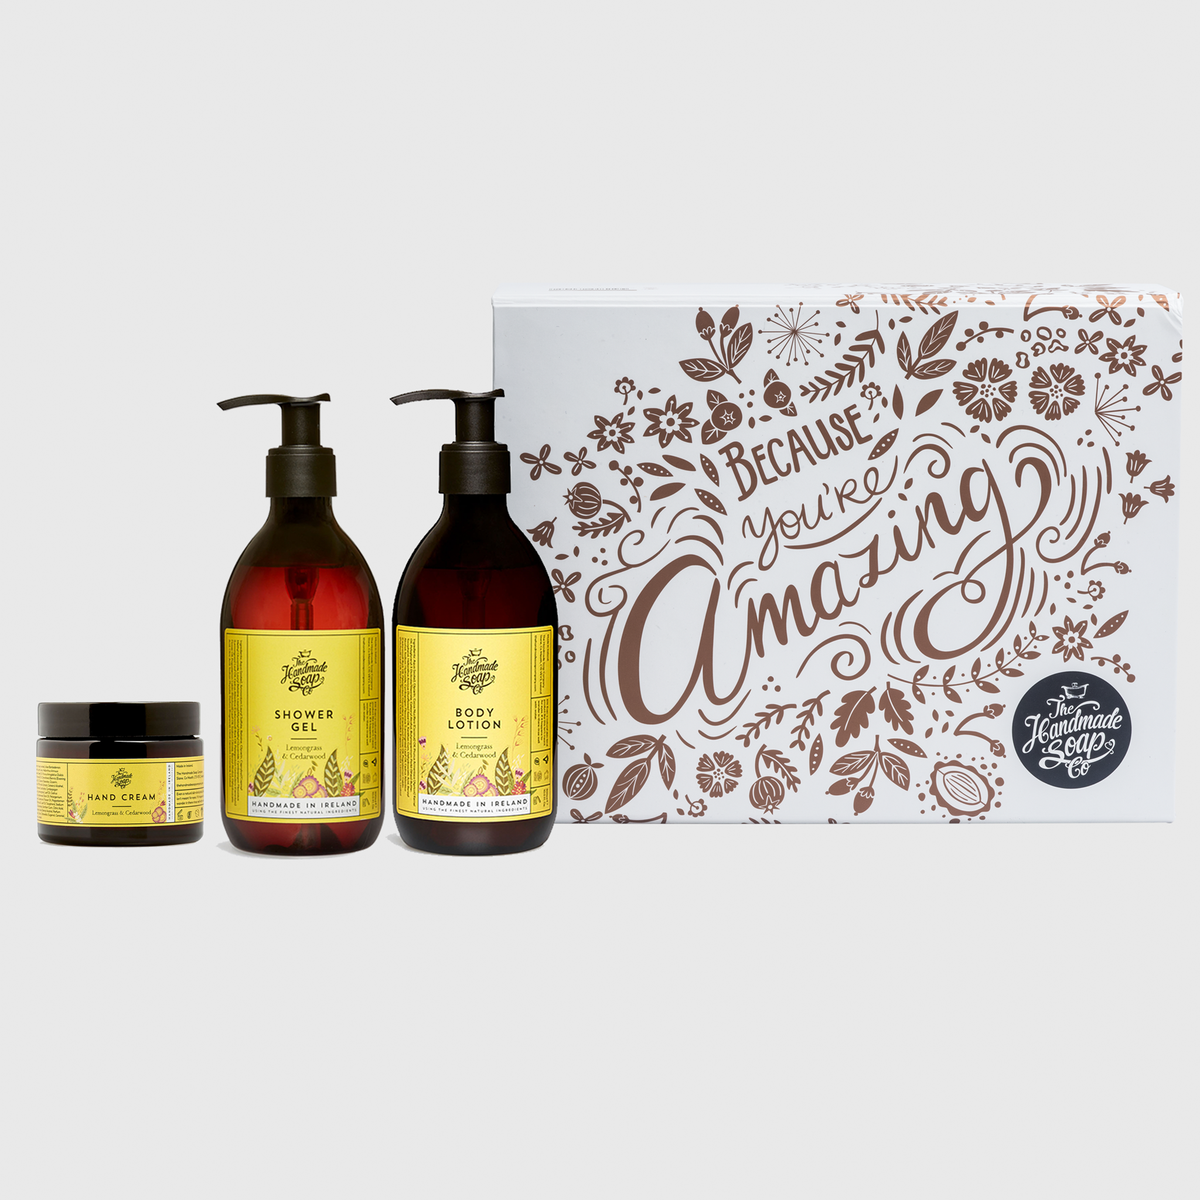 The Handmade Soap Co   Because You’re Amazing   Giftset